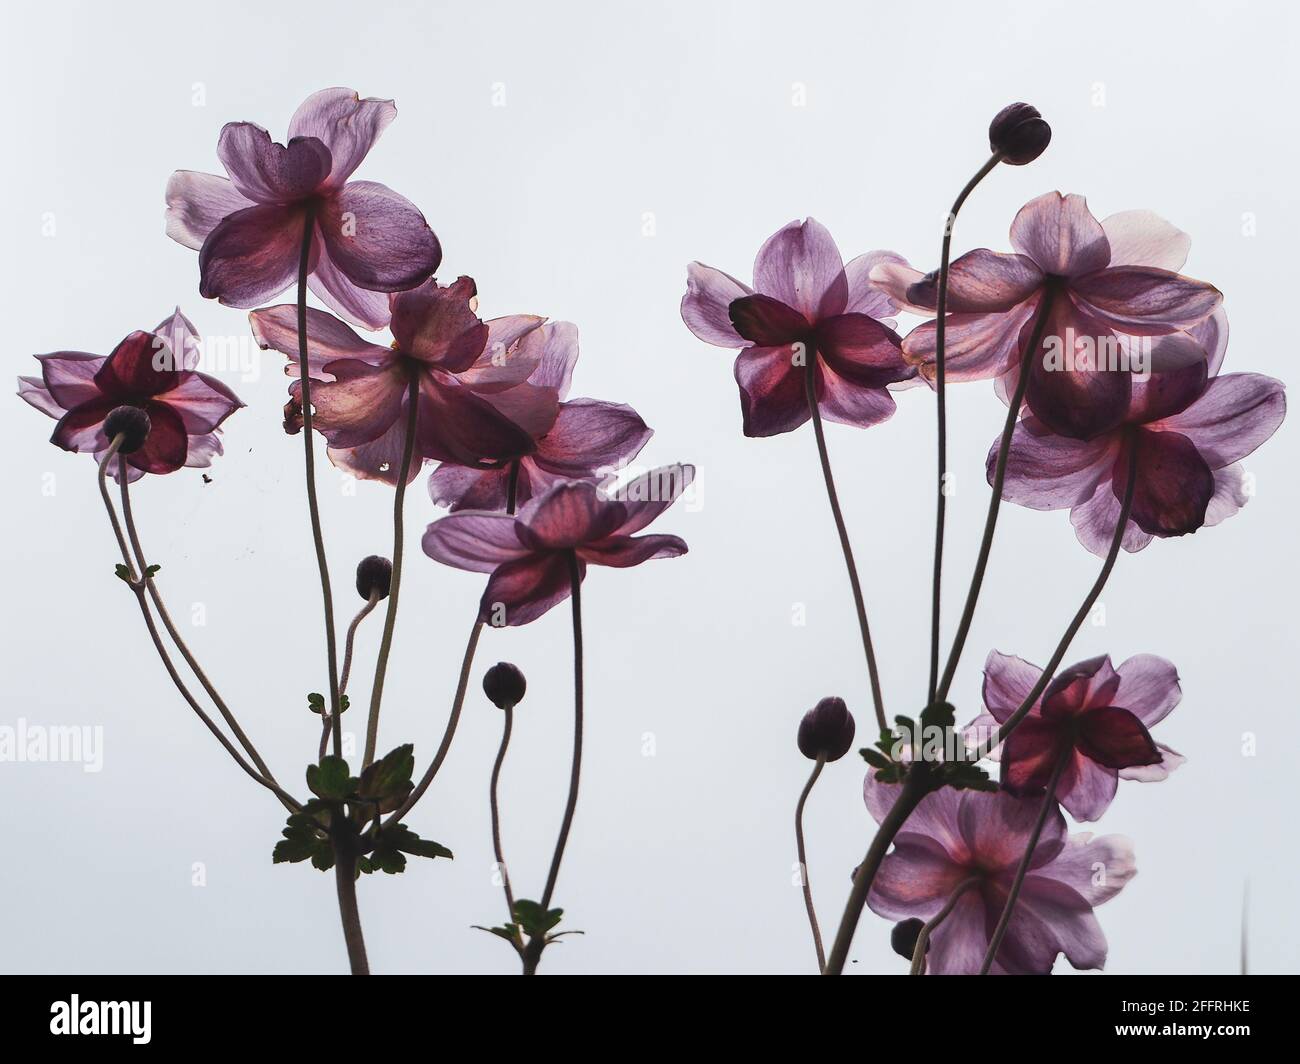 Flowers, Artistic edit of pink Japanese Windflowers underside blooming majestically in an Australian Garden. Petals almost translucent in sunlight Stock Photo